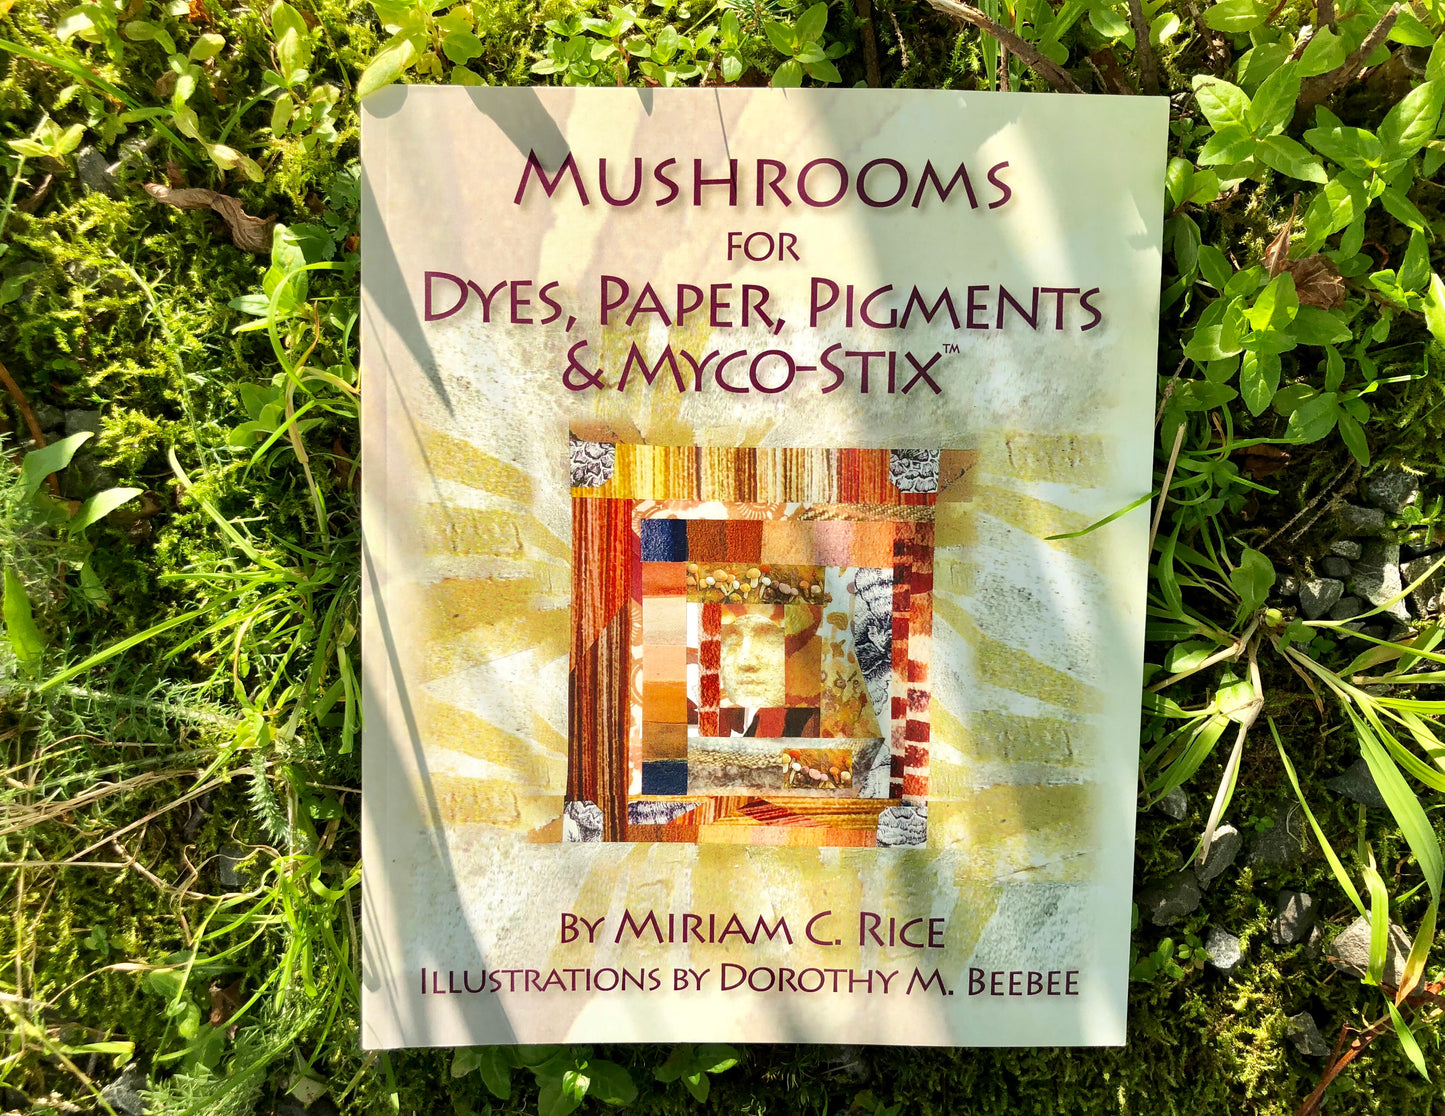 Mushrooms for Dyes, Paper, Pigments & Myco-Stix by Miriam C. Rice